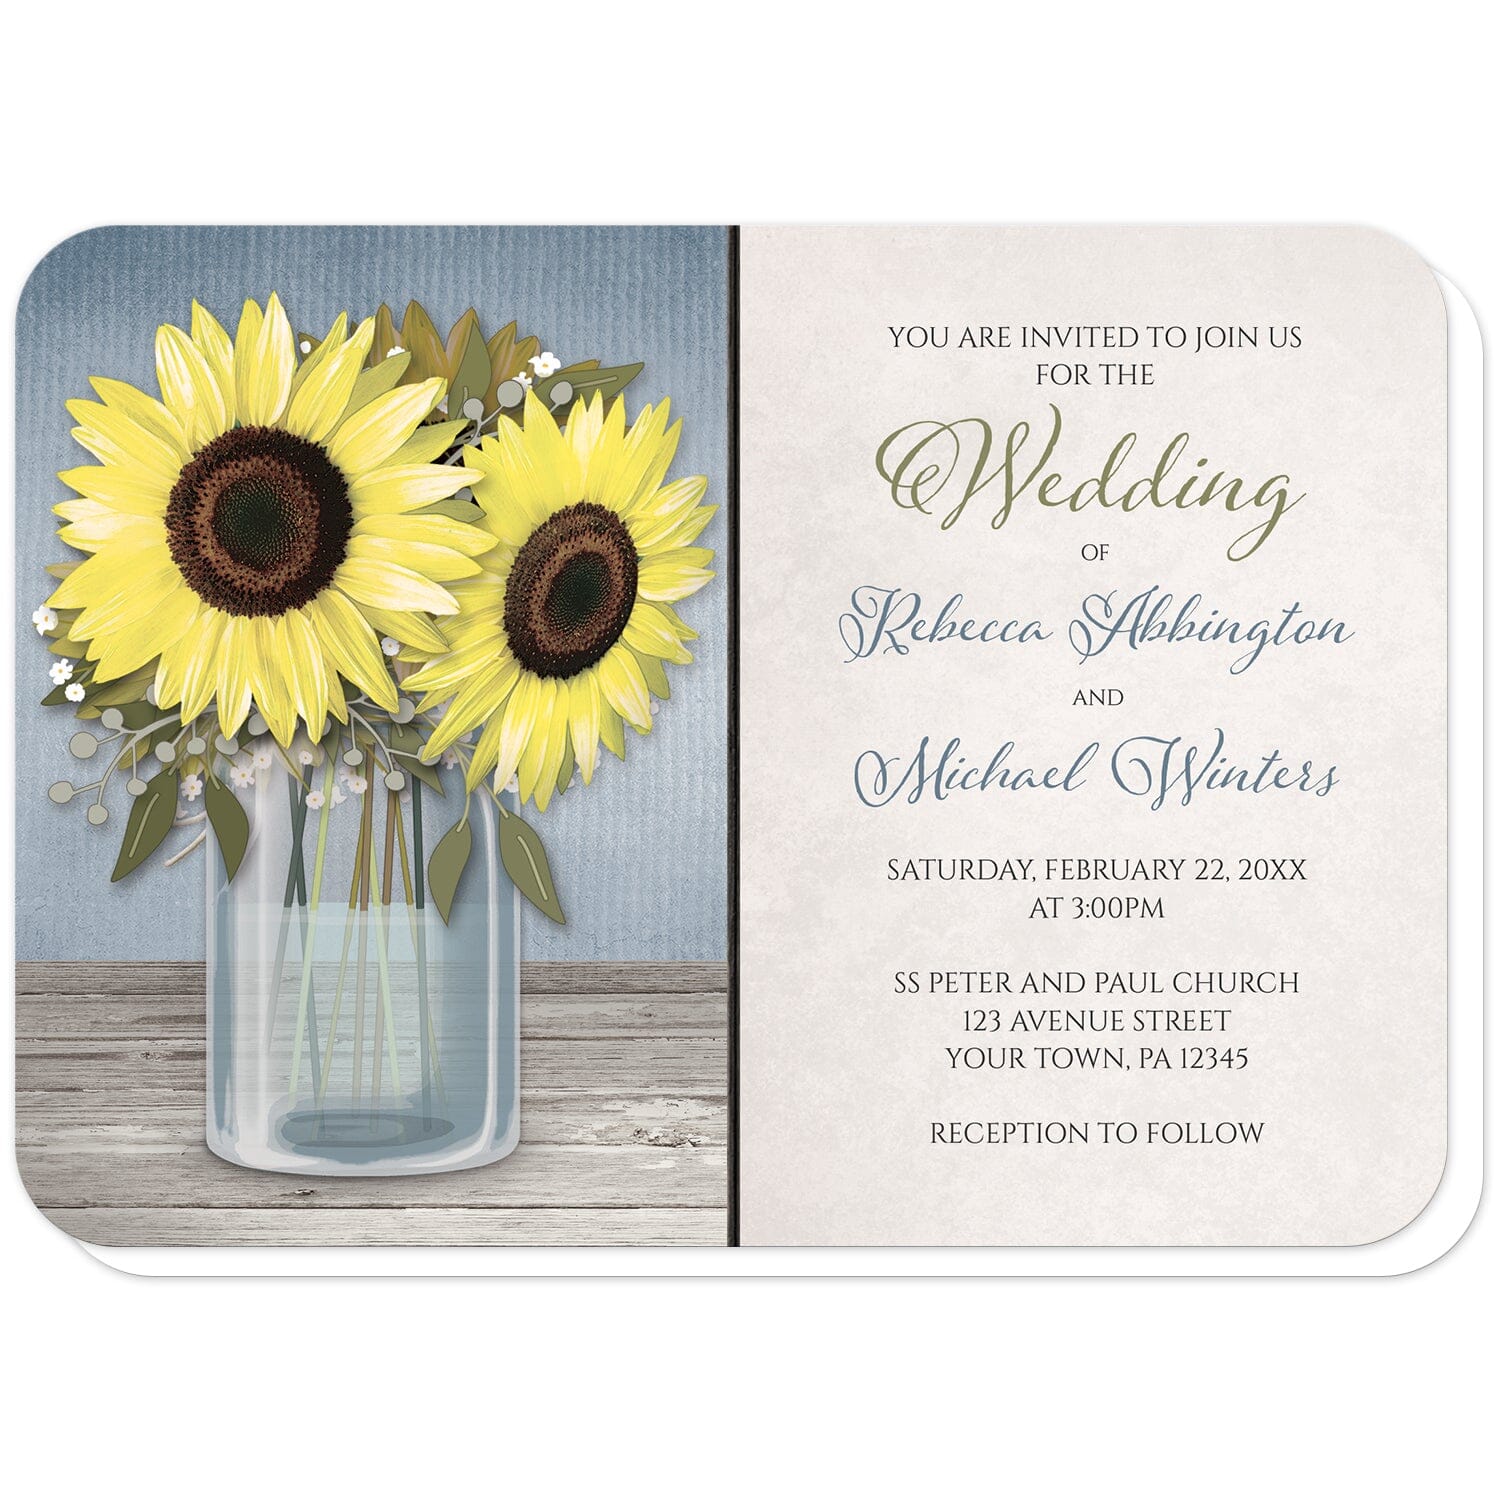 Sunflower Rustic Mason Jar Blue Wedding Invitations (with rounded corners) at Artistically Invited. Country-inspired sunflower blue mason jar rustic wedding invitations designed with an illustration of a mason jar with water, holding big yellow sunflowers on a light wood tabletop over a rustic blue background. Your personalized marriage celebration details are custom printed in blue, green, and dark brown over a light parchment-like background to the right of the sunflower mason jar design.